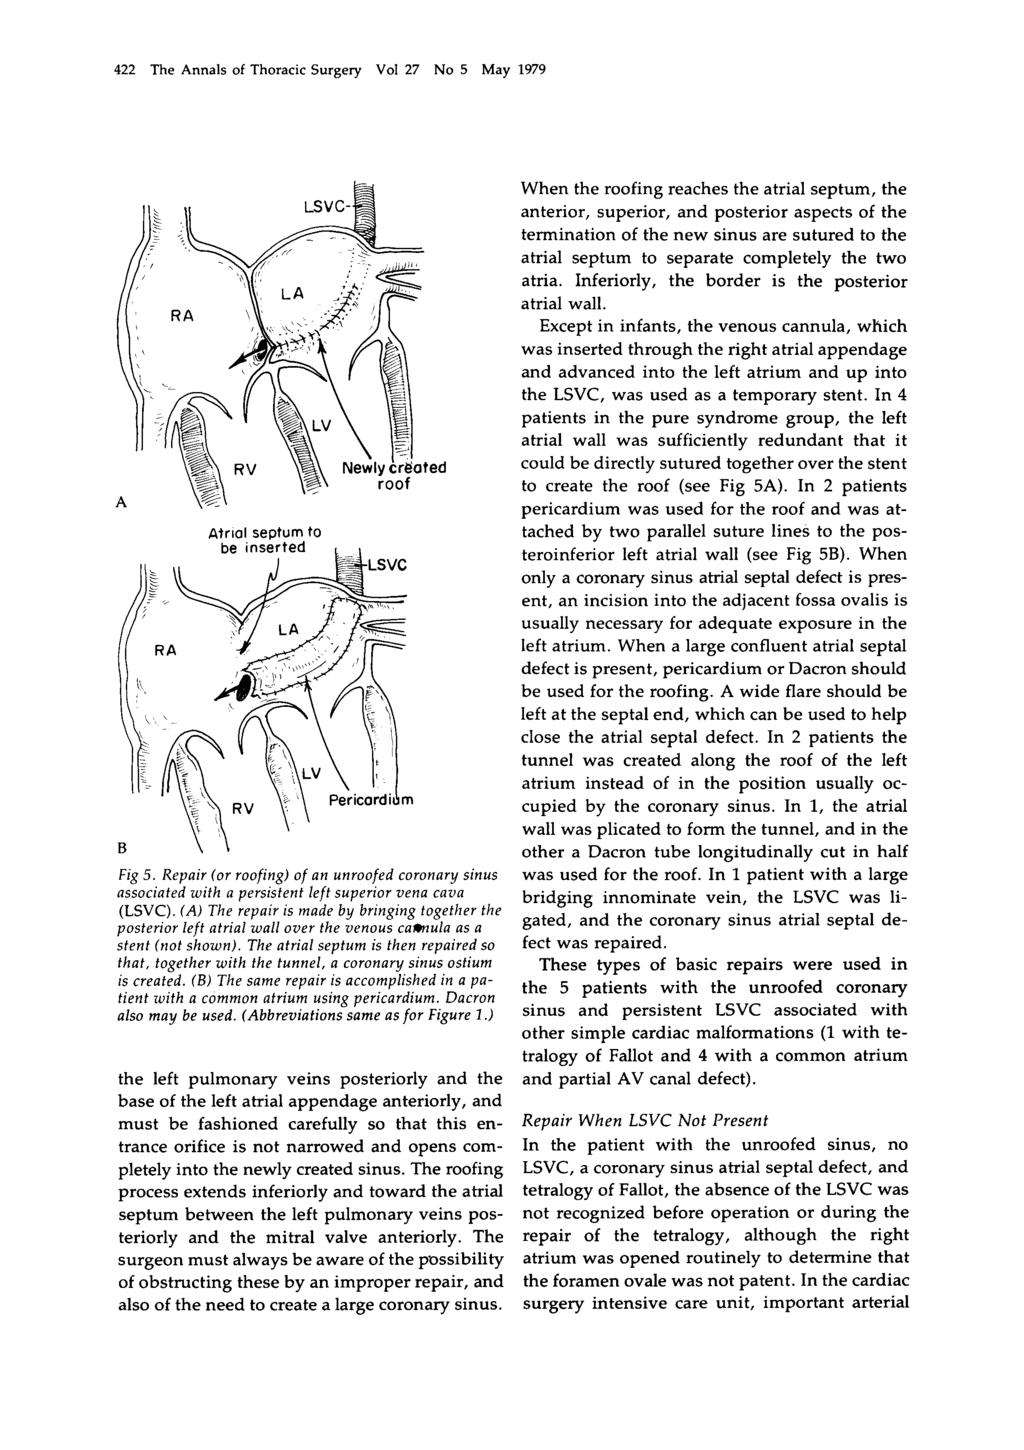 422 The Annals of Thoracic Surgery Vol 27 No 5 May 1979 B \ \ Atrial septum to Fig 5. Repair (or roofing) of an unroofed coronary sinus associated with a persistent left superior vena cava (LSVC).